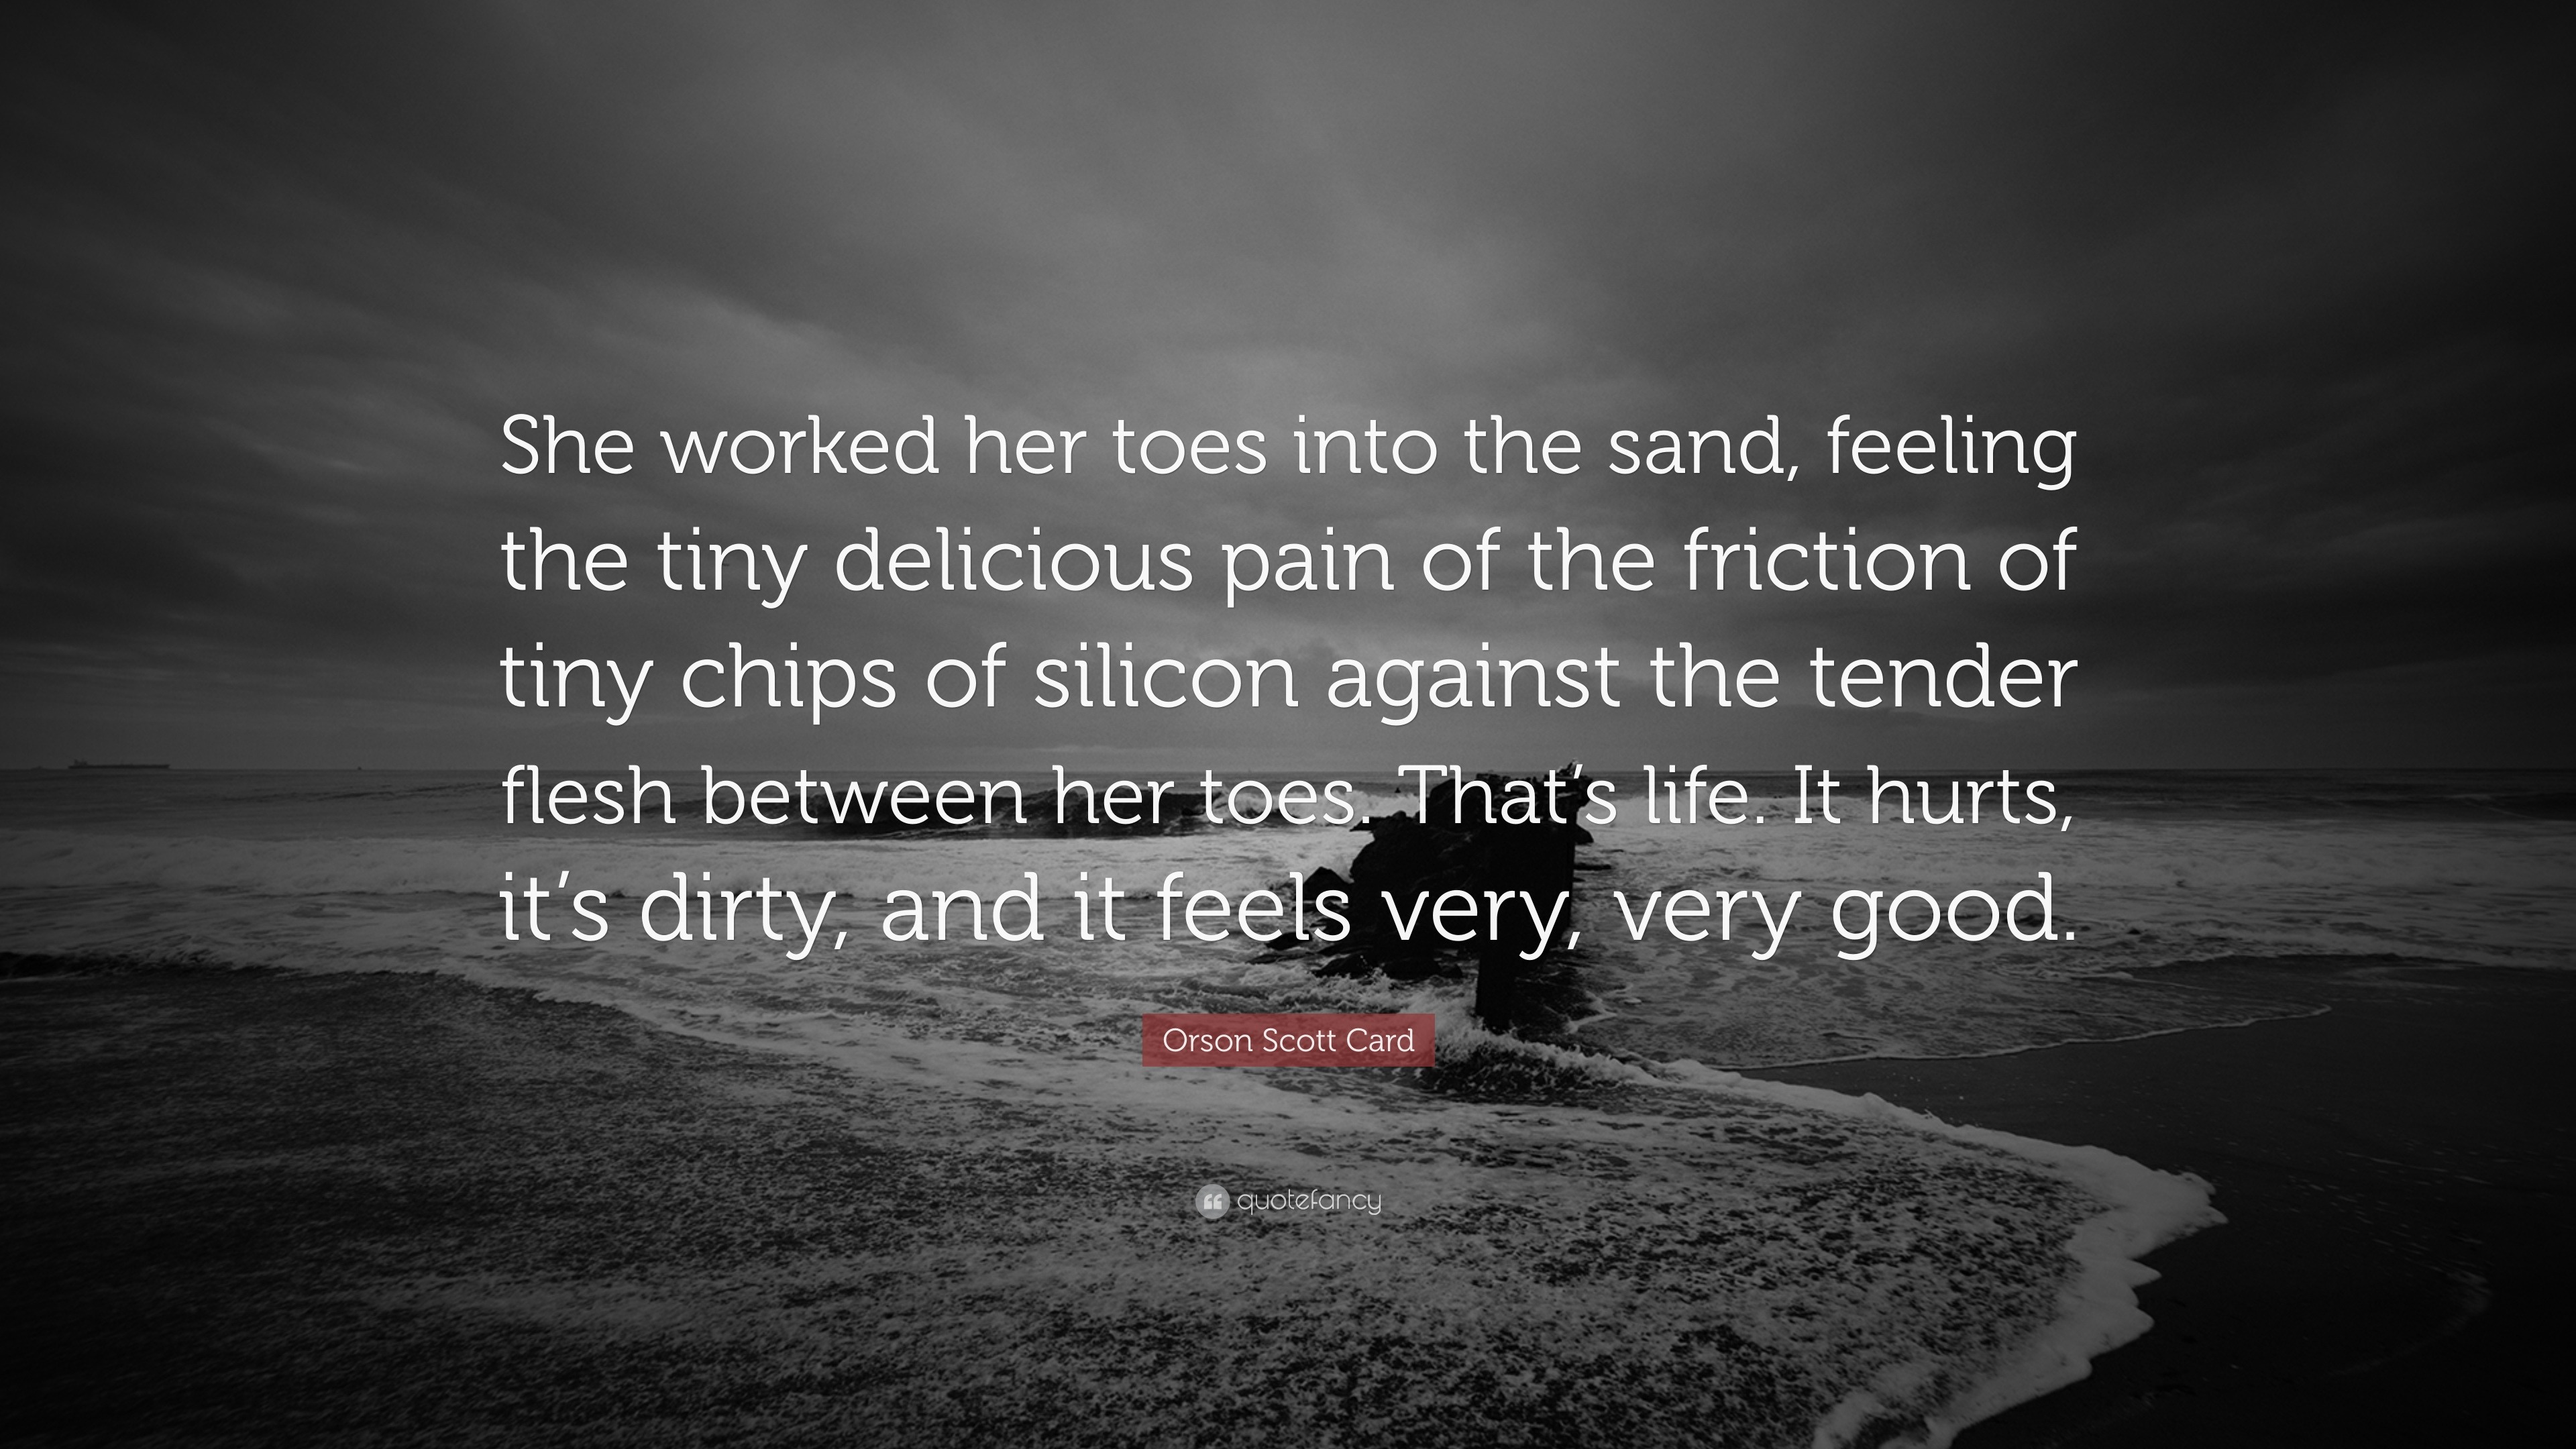 Orson Scott Card Quote: “She worked her toes into the sand, feeling the ...